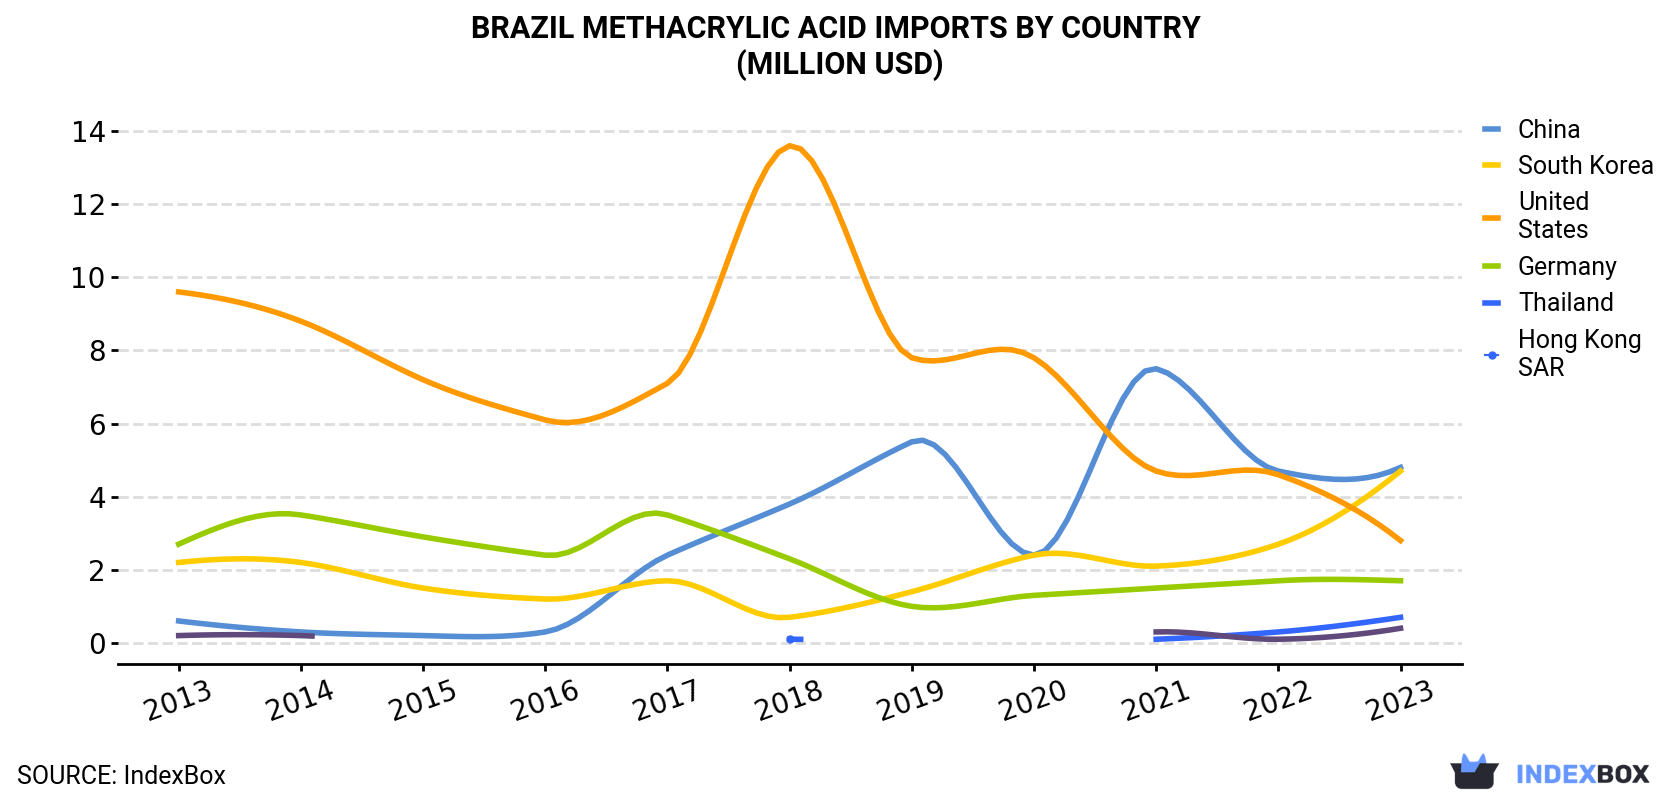 Brazil Methacrylic Acid Imports By Country (Million USD)